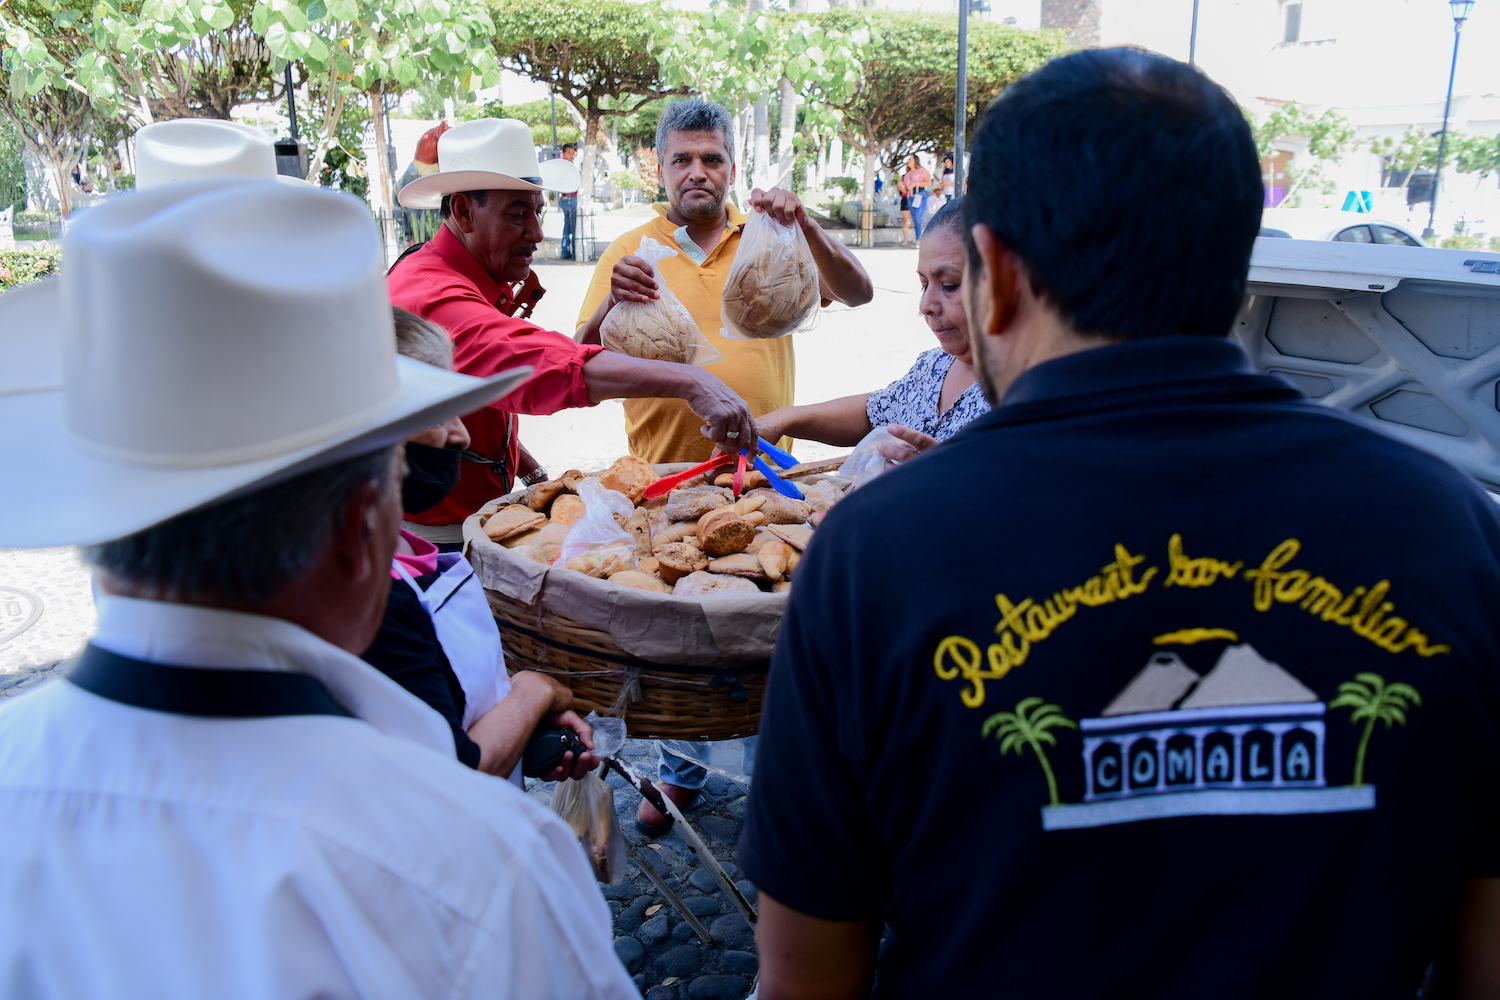 People handing out bread in Comala, Mexico 